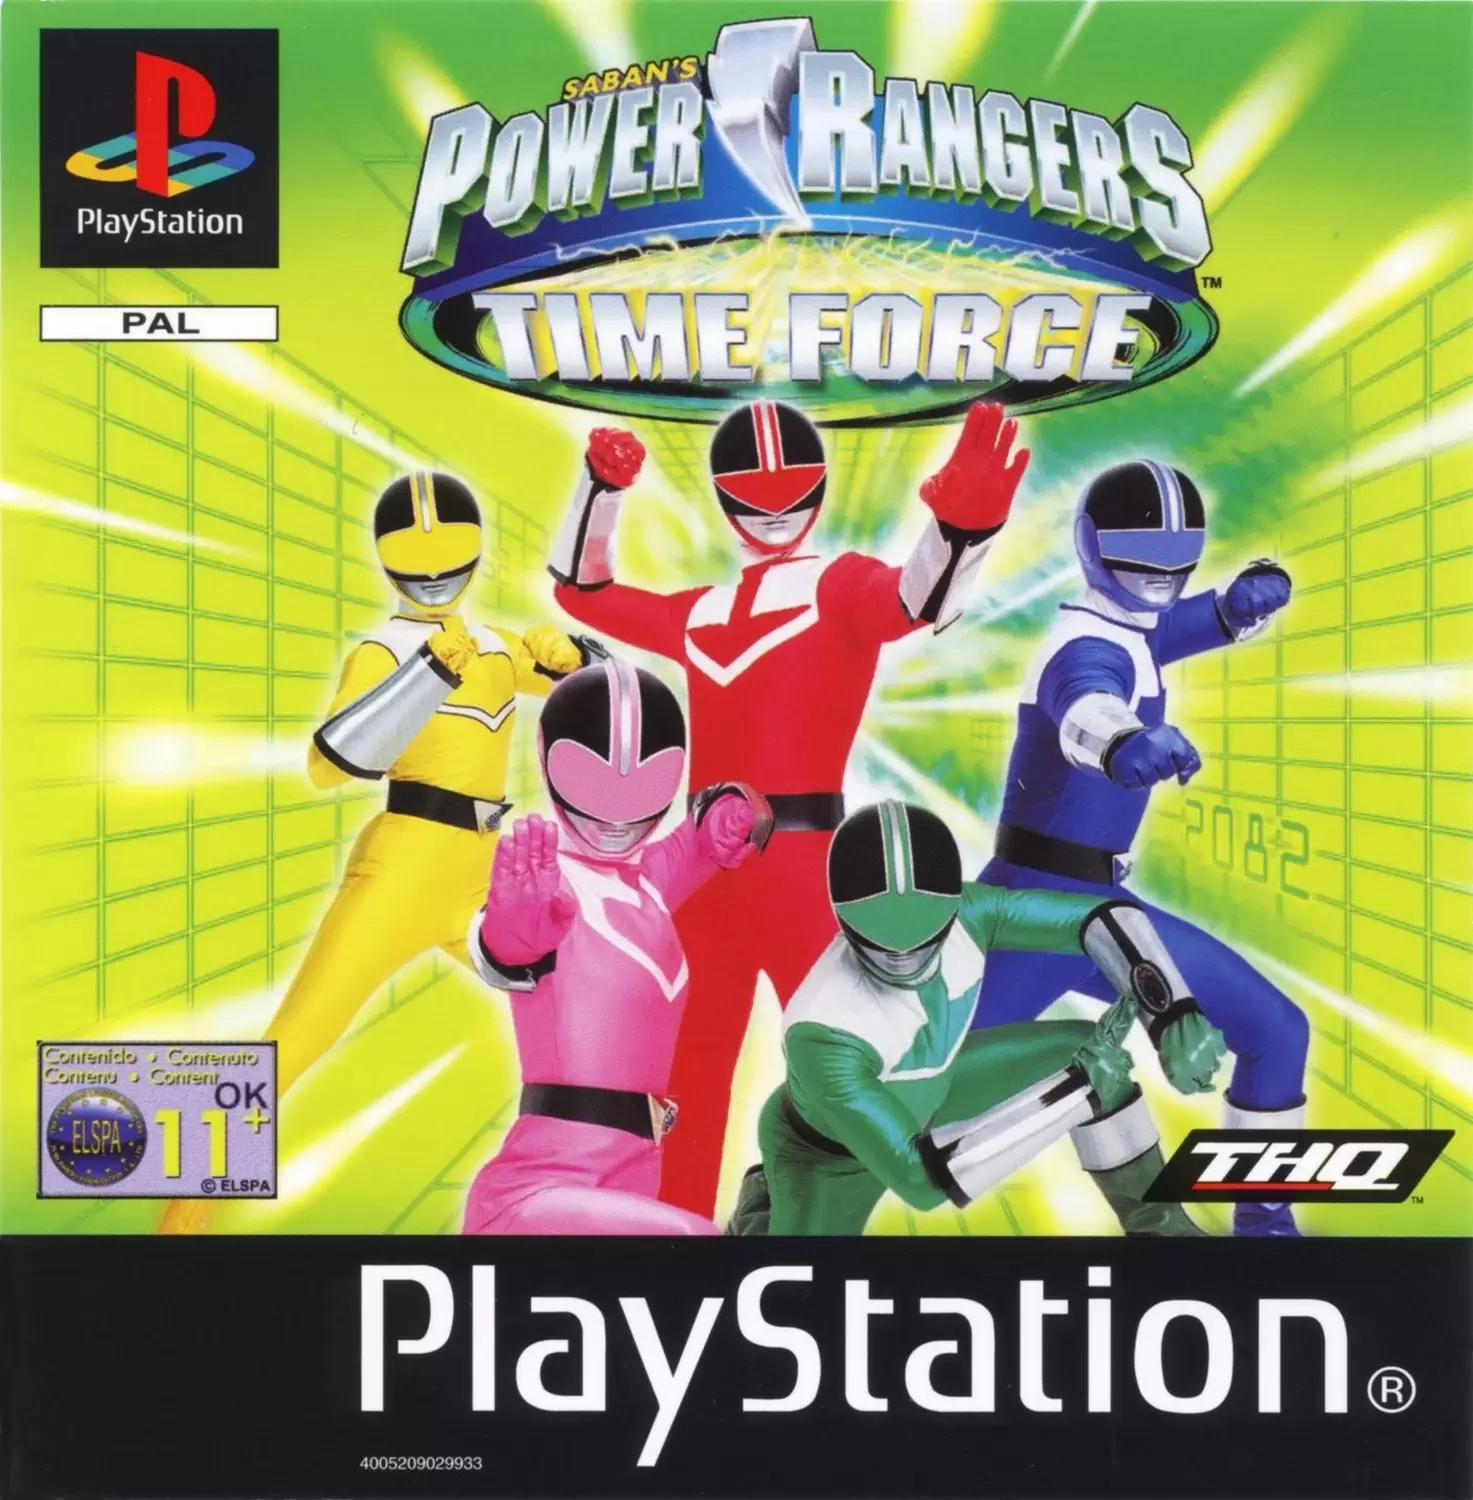 Playstation games - Power Rangers Time Force